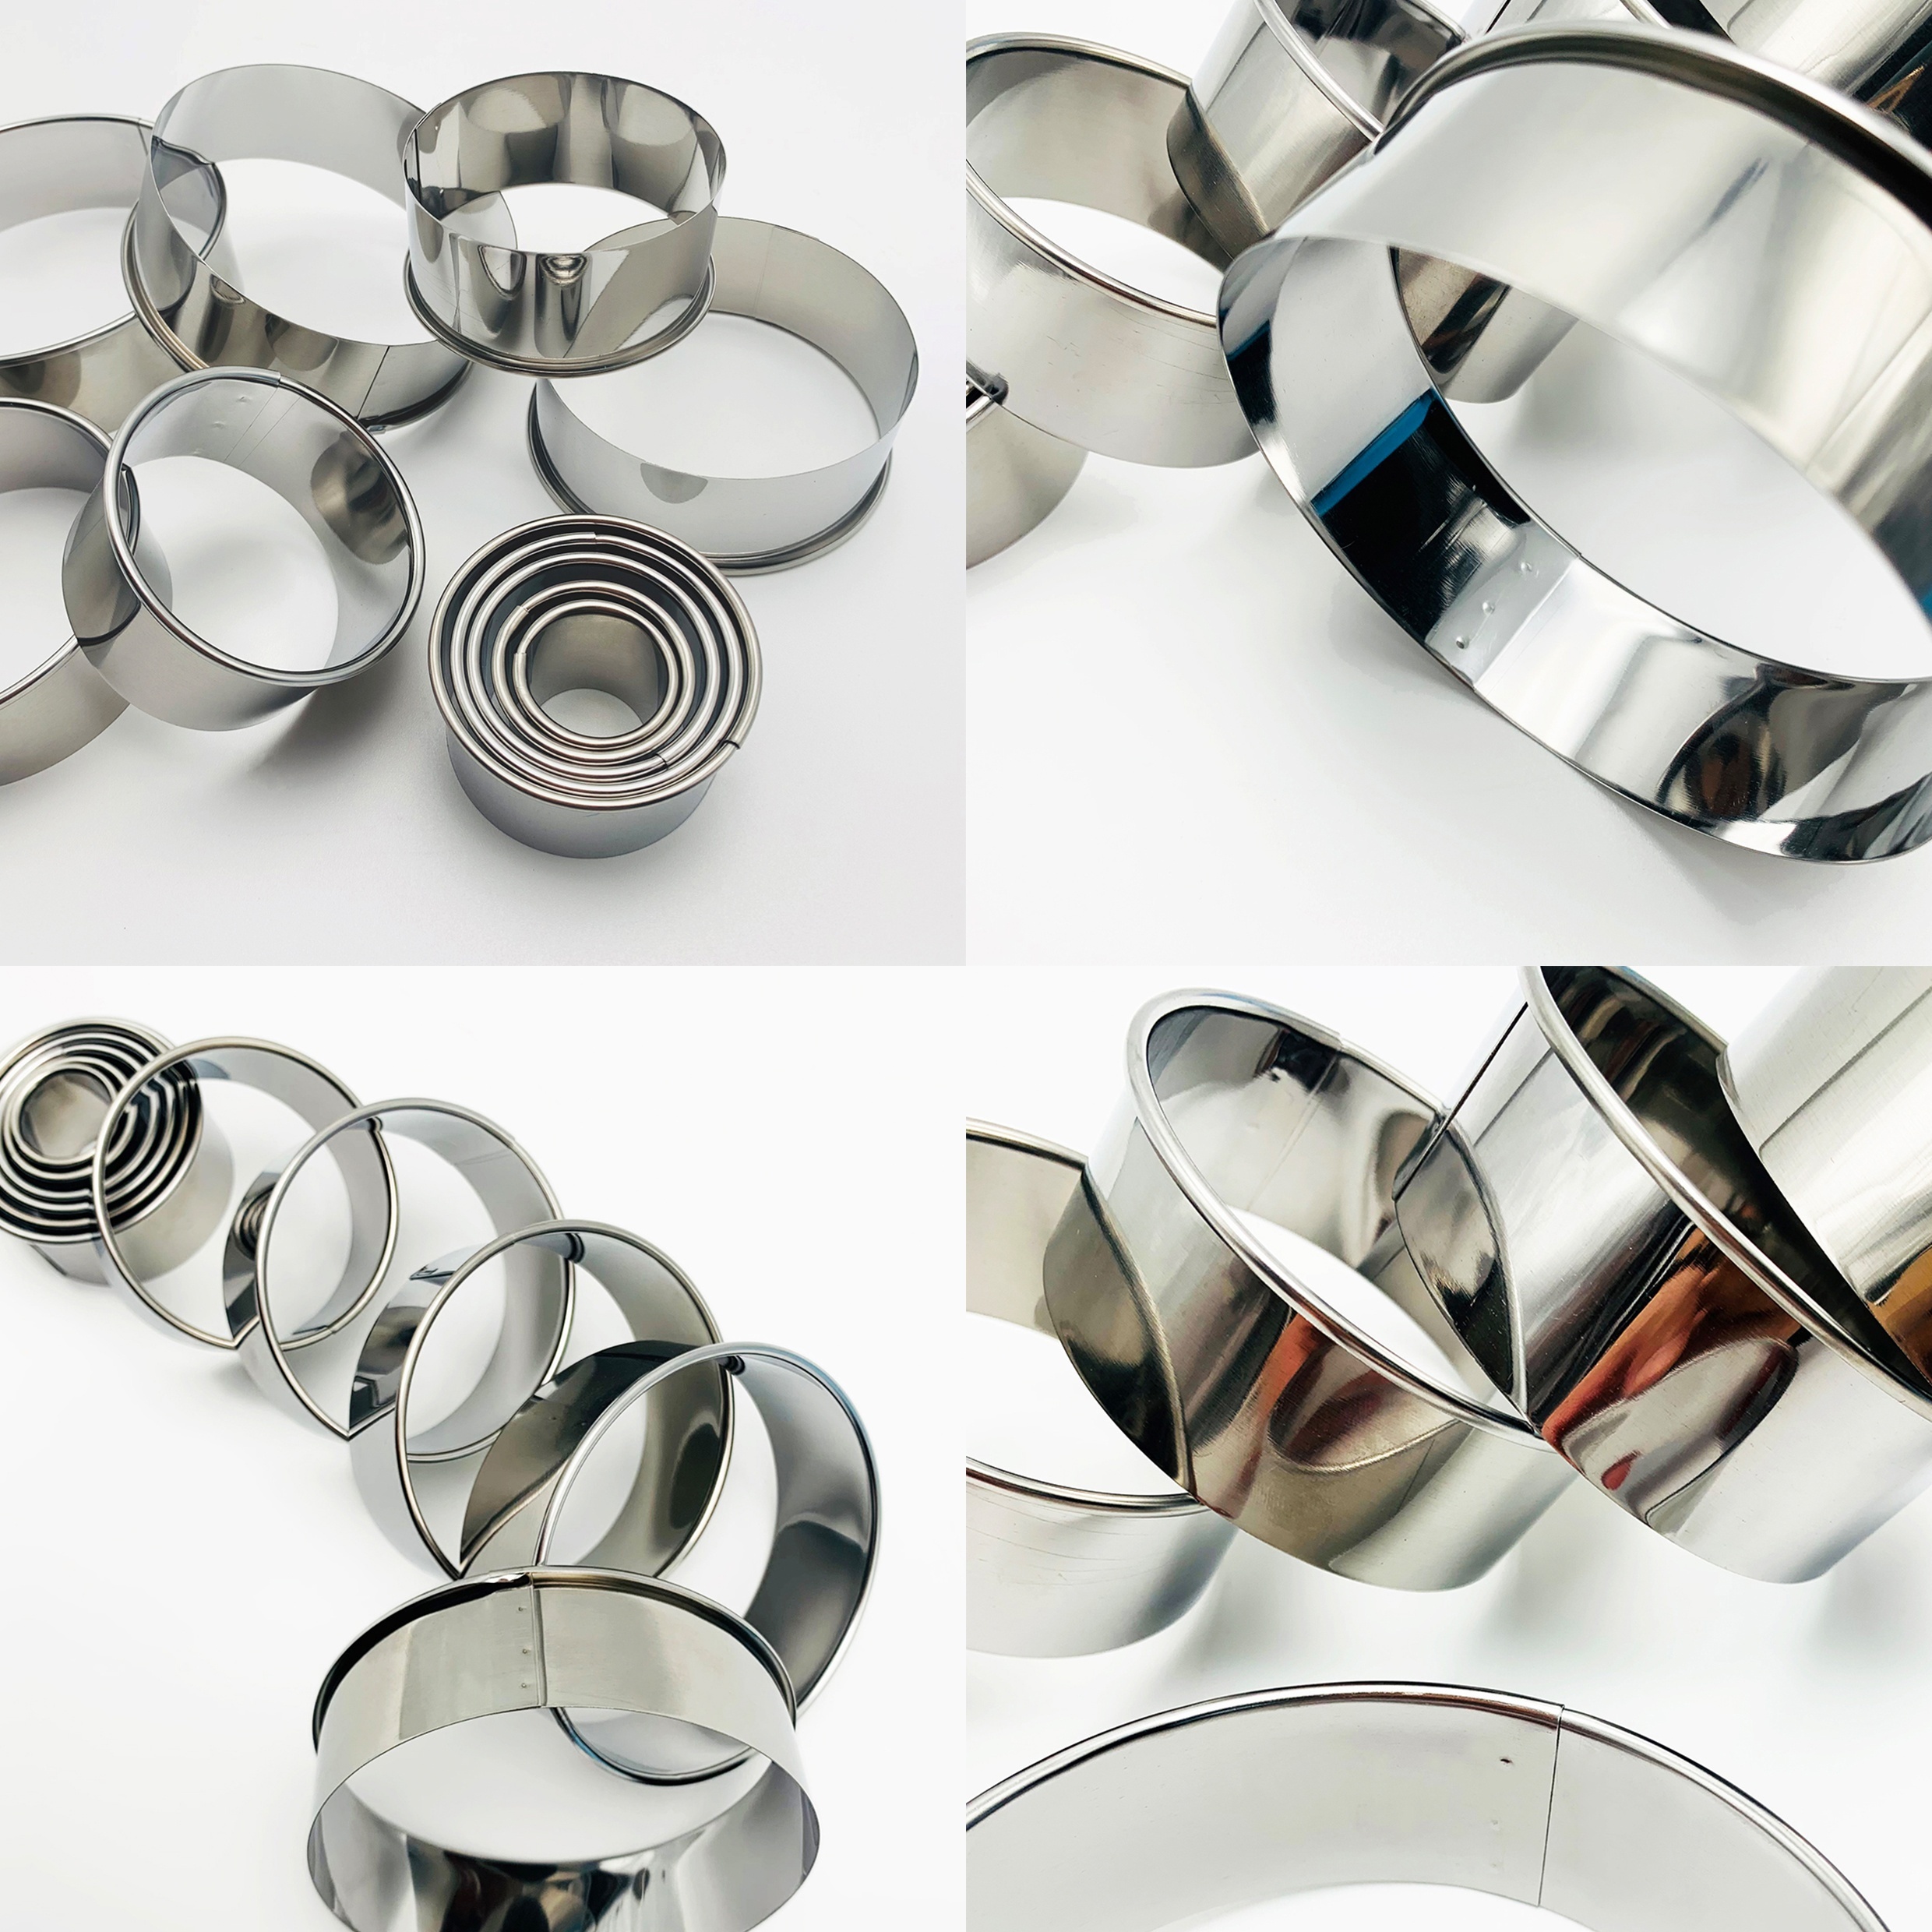 12 Pieces Round Cookie Biscuit Cutter Set,Graduated Circle for Pastry,18/8  Stainless Steel Donut Cutter Ring Molds